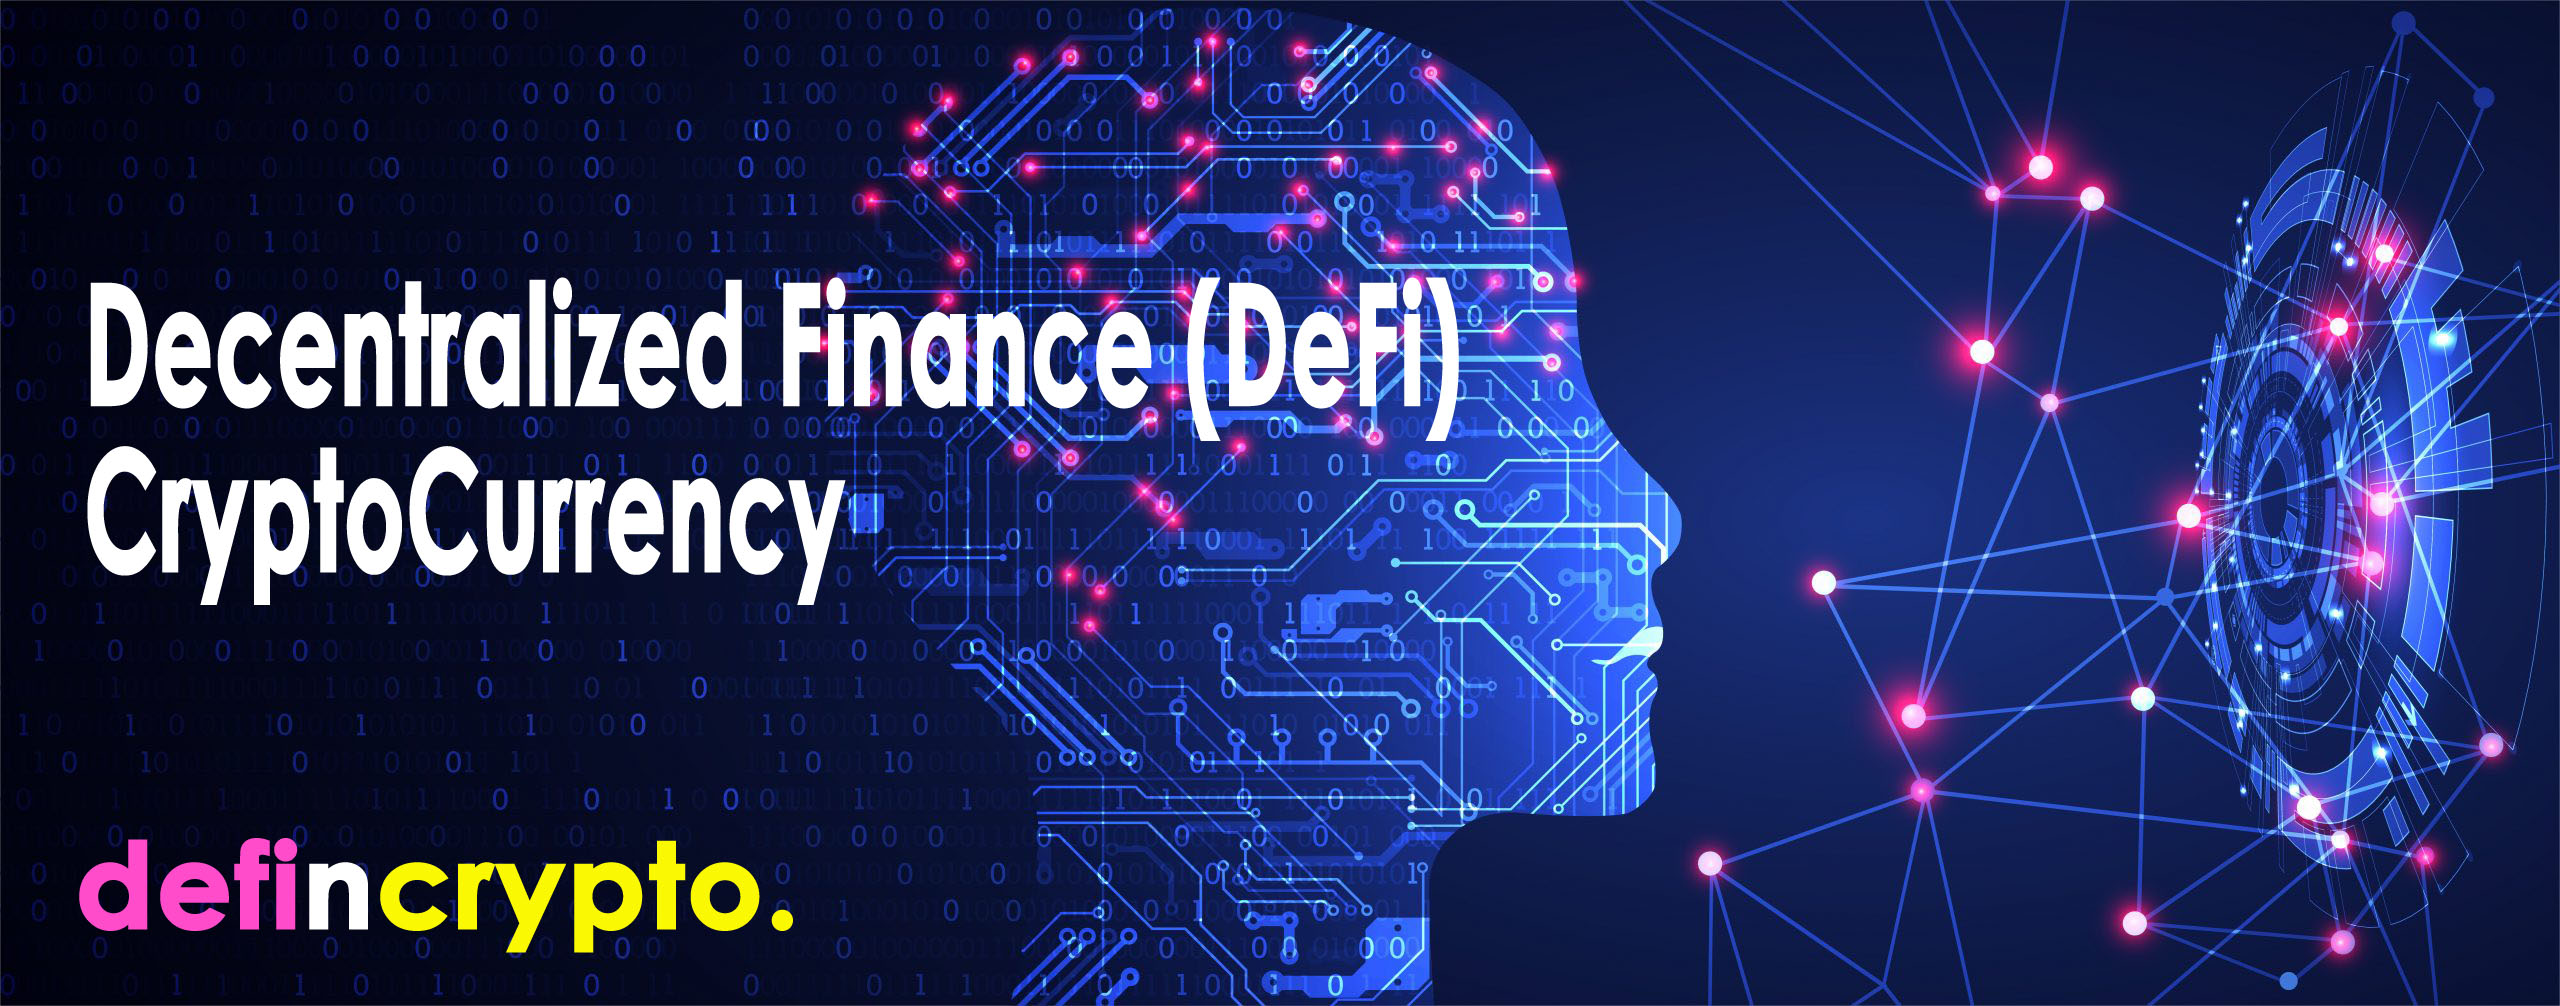 defincrypto decentralized finance and cryptocurrency.jpg